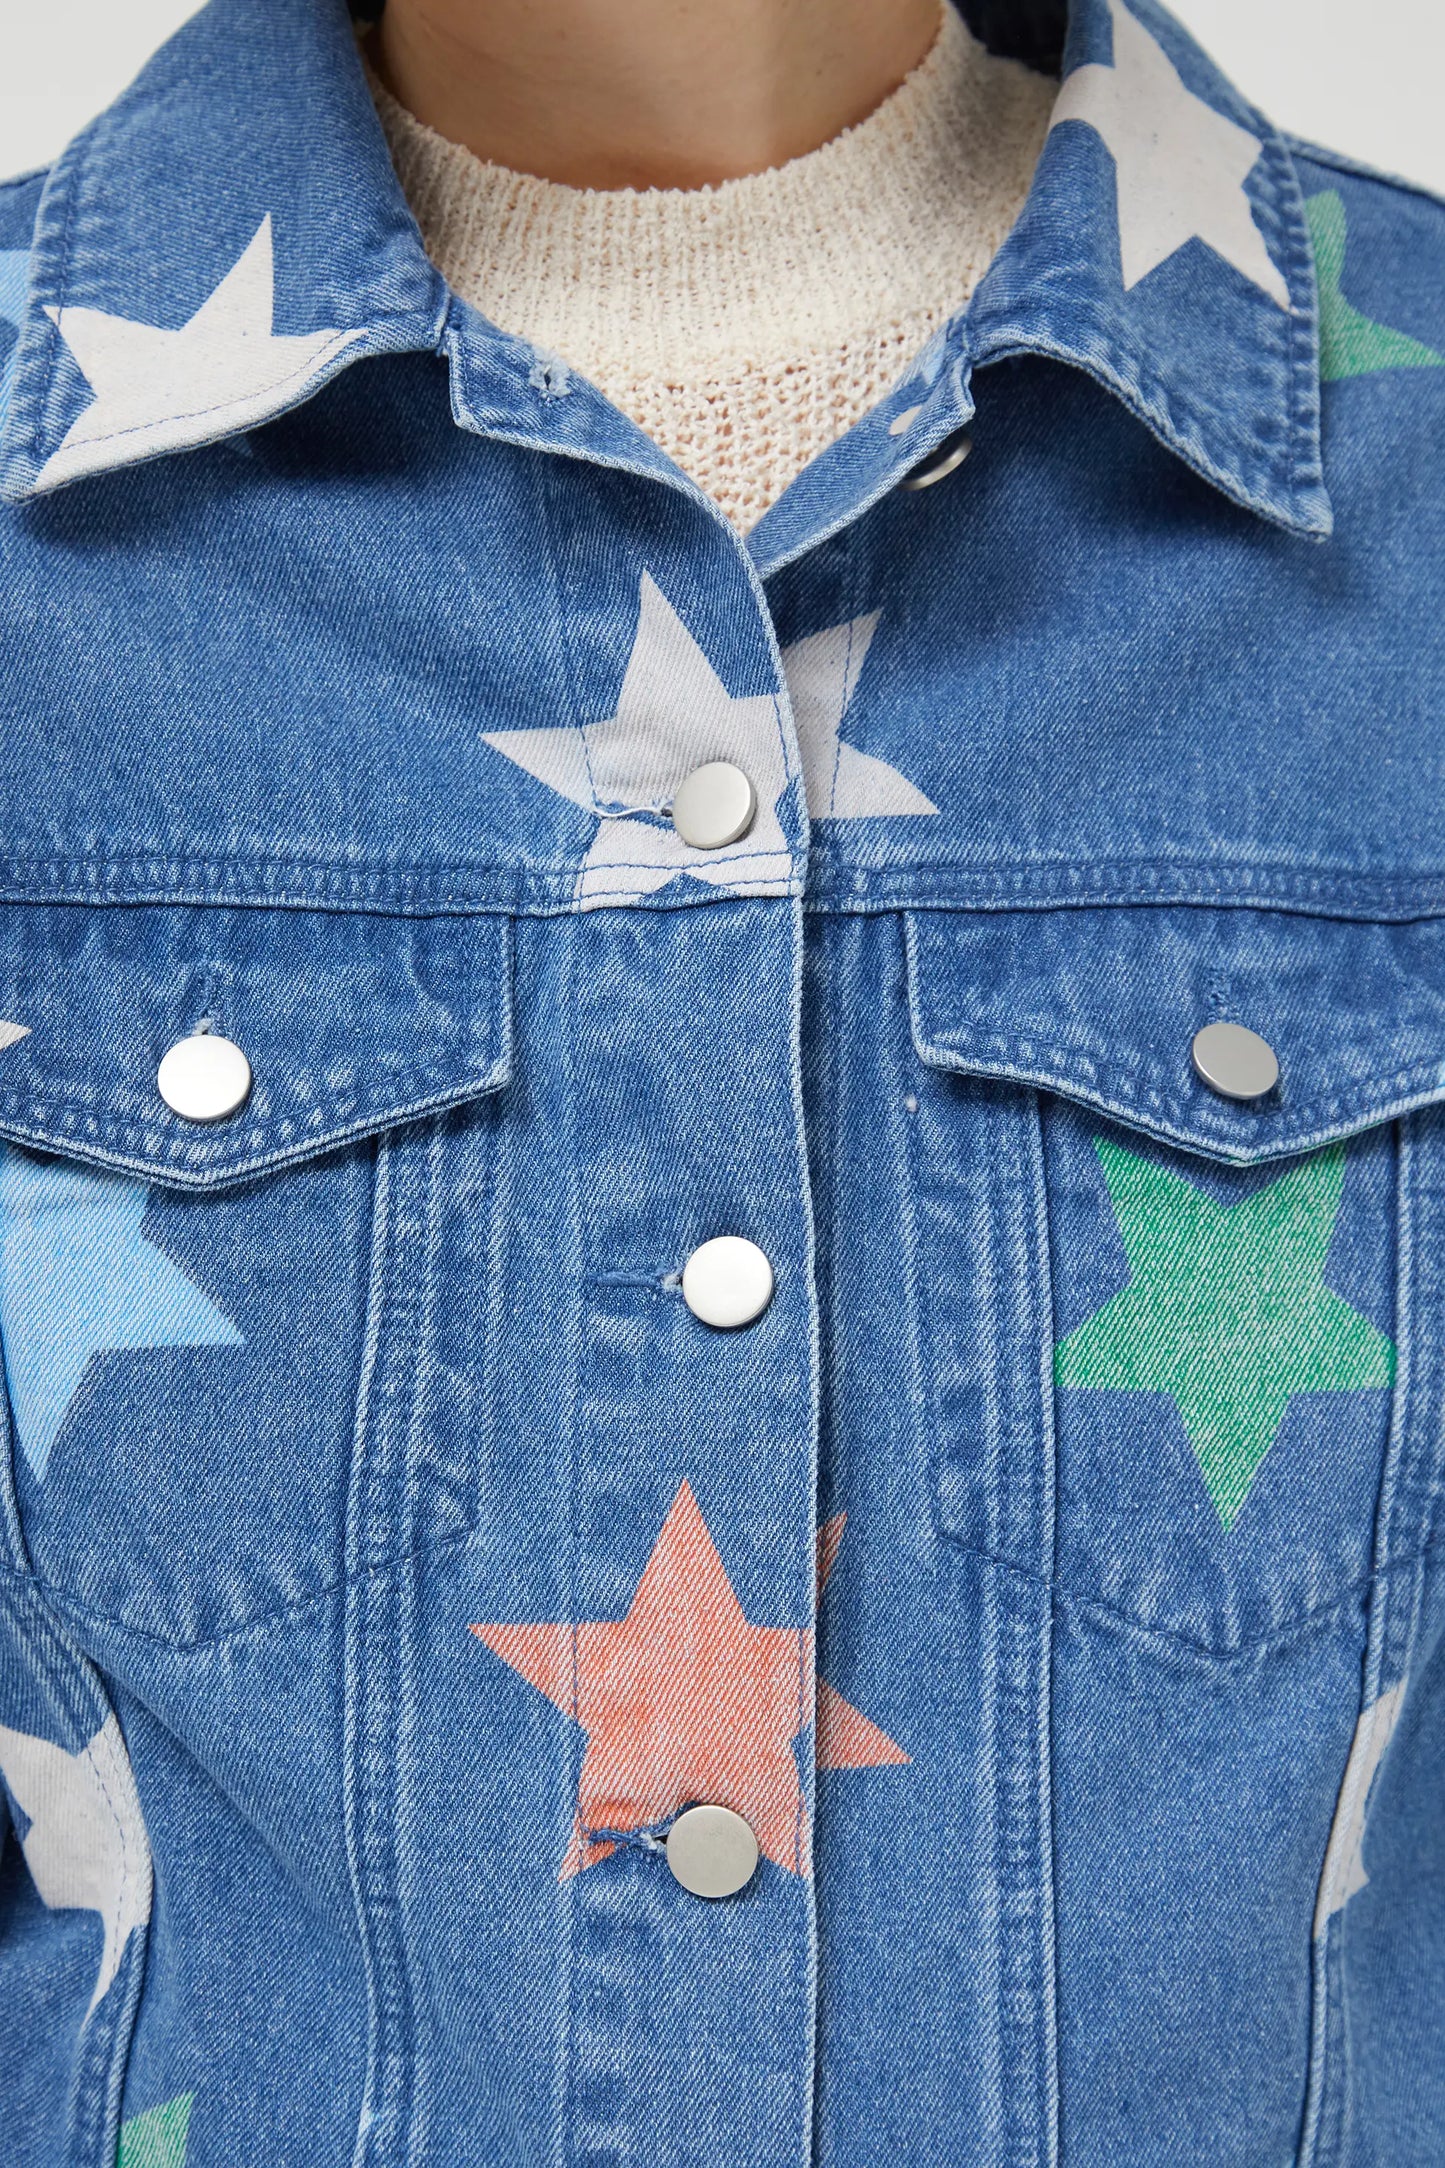 Giacca in denim con stampa stelle